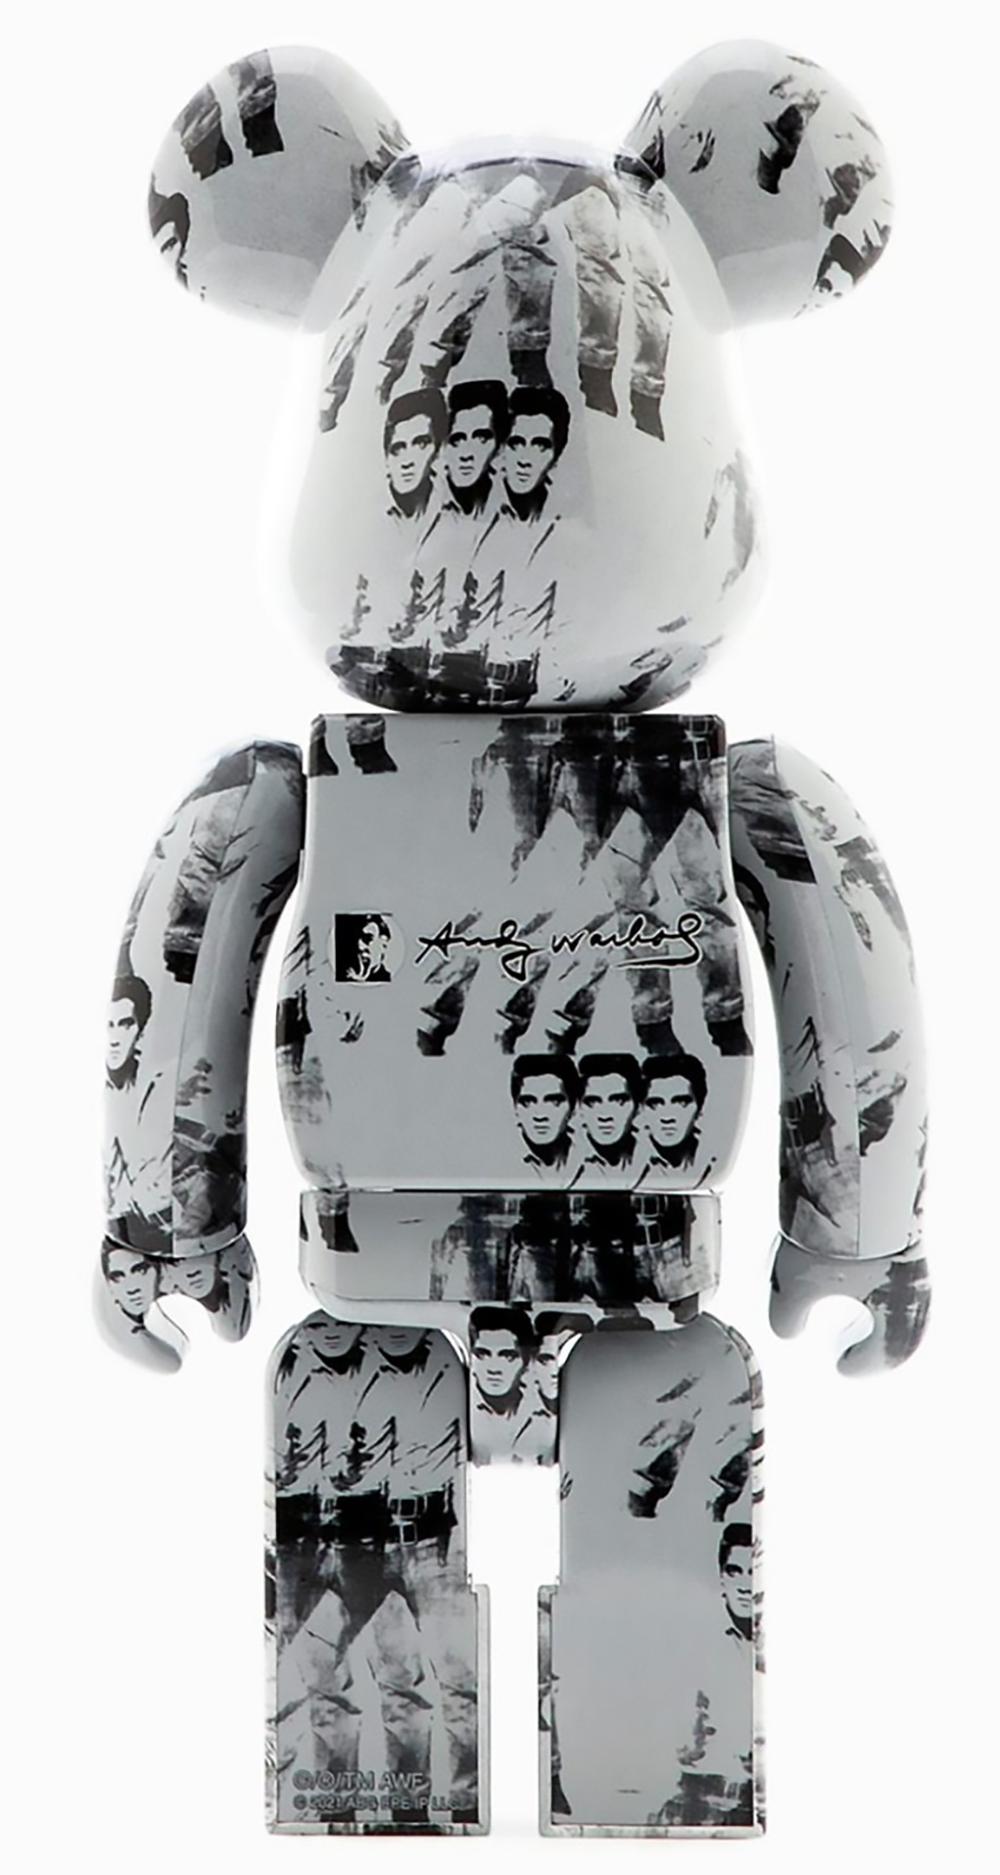 Andy Warhol Bearbrick 400% Figures: Set of 4 works c.2019-2021:
A unique and timeless Warhol collectible set, each trademarked & licensed by the Estate of Andy Warhol. The partnered figures reveals the late iconic artist’s 1960s/70s artwork wrapping